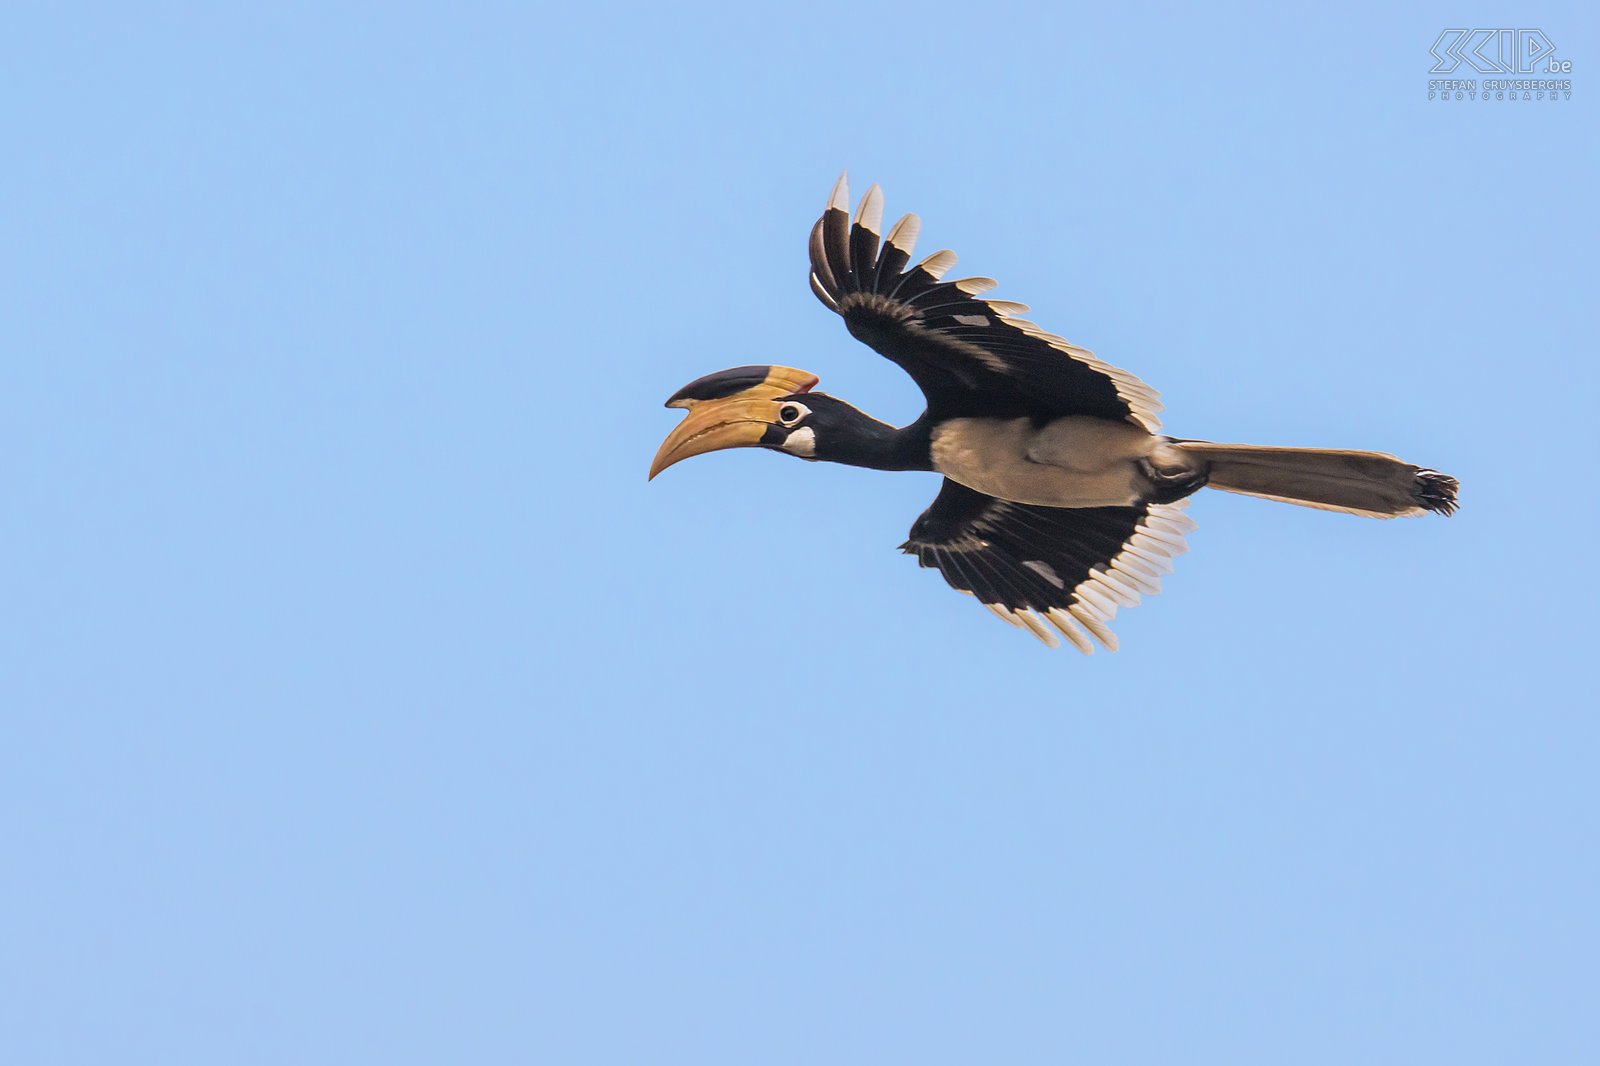 Dandeli - Flying Malabar pied hornbill The Malabar pied hornbill (Anthracoceros coronatus) is 68 cm long and has an impressive bill with horn. They feed mainly on wild fruits. Stefan Cruysberghs